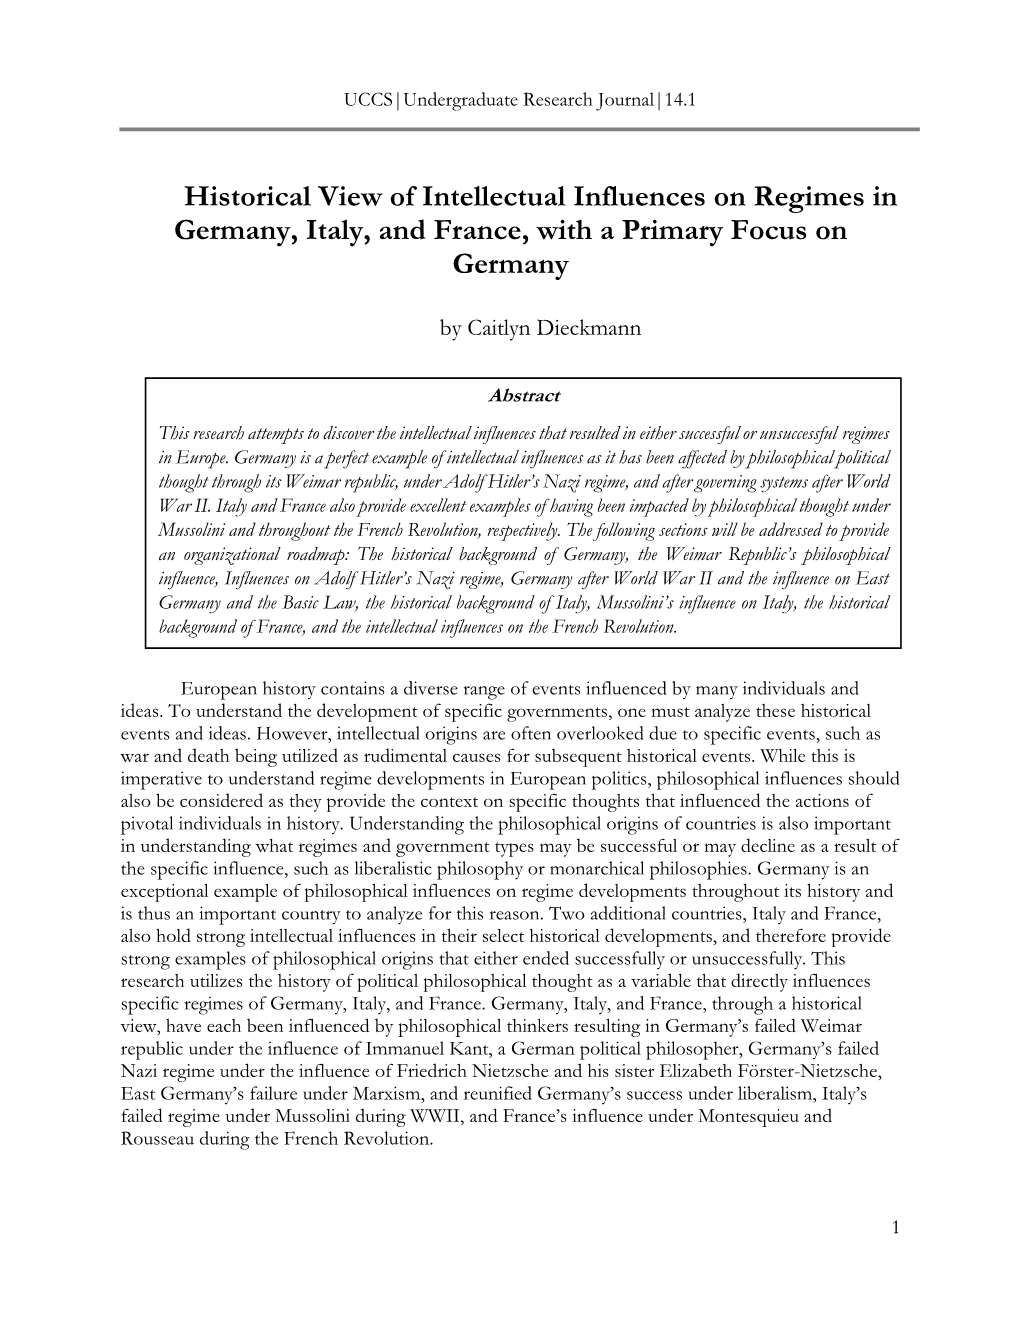 Historical View of Intellectual Influences on Regimes in Germany, Italy, and France, with a Primary Focus on Germany